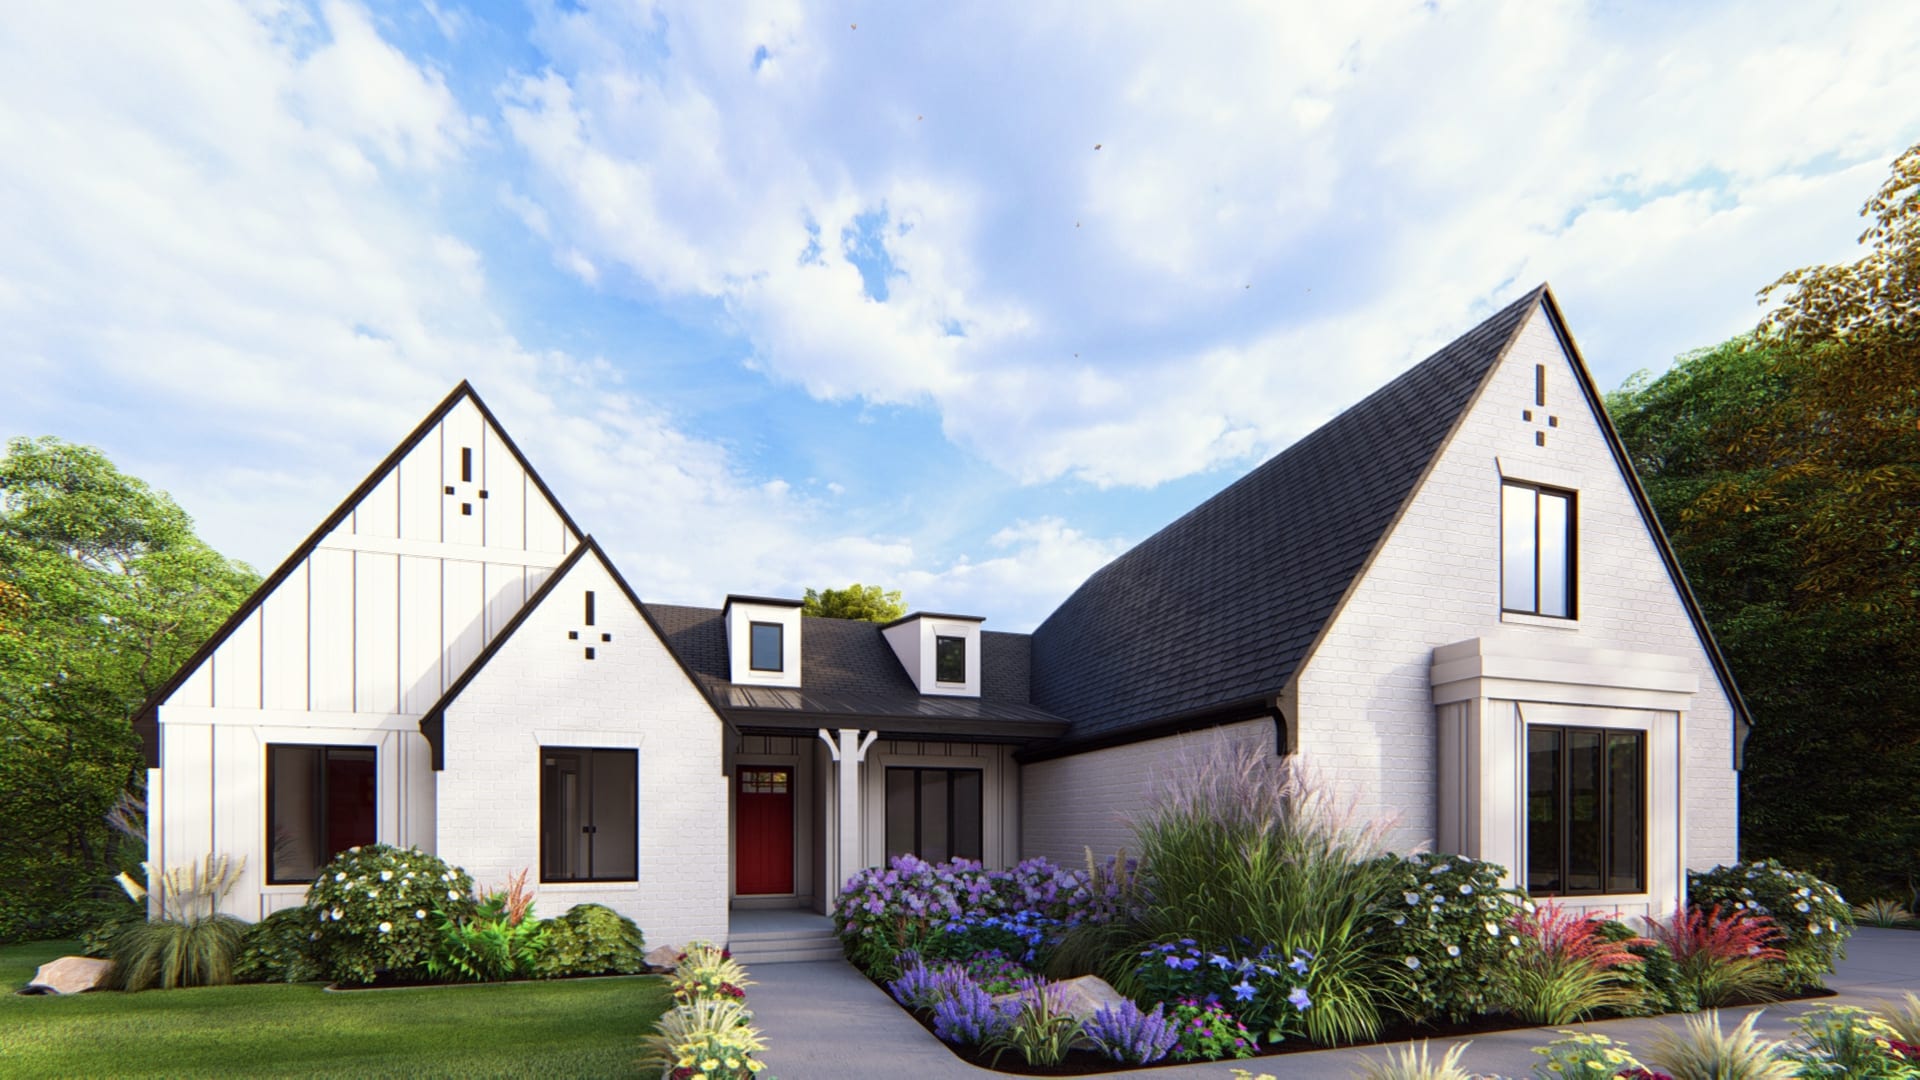 Cannon Beach - Ancient Modern House Plan Rendering